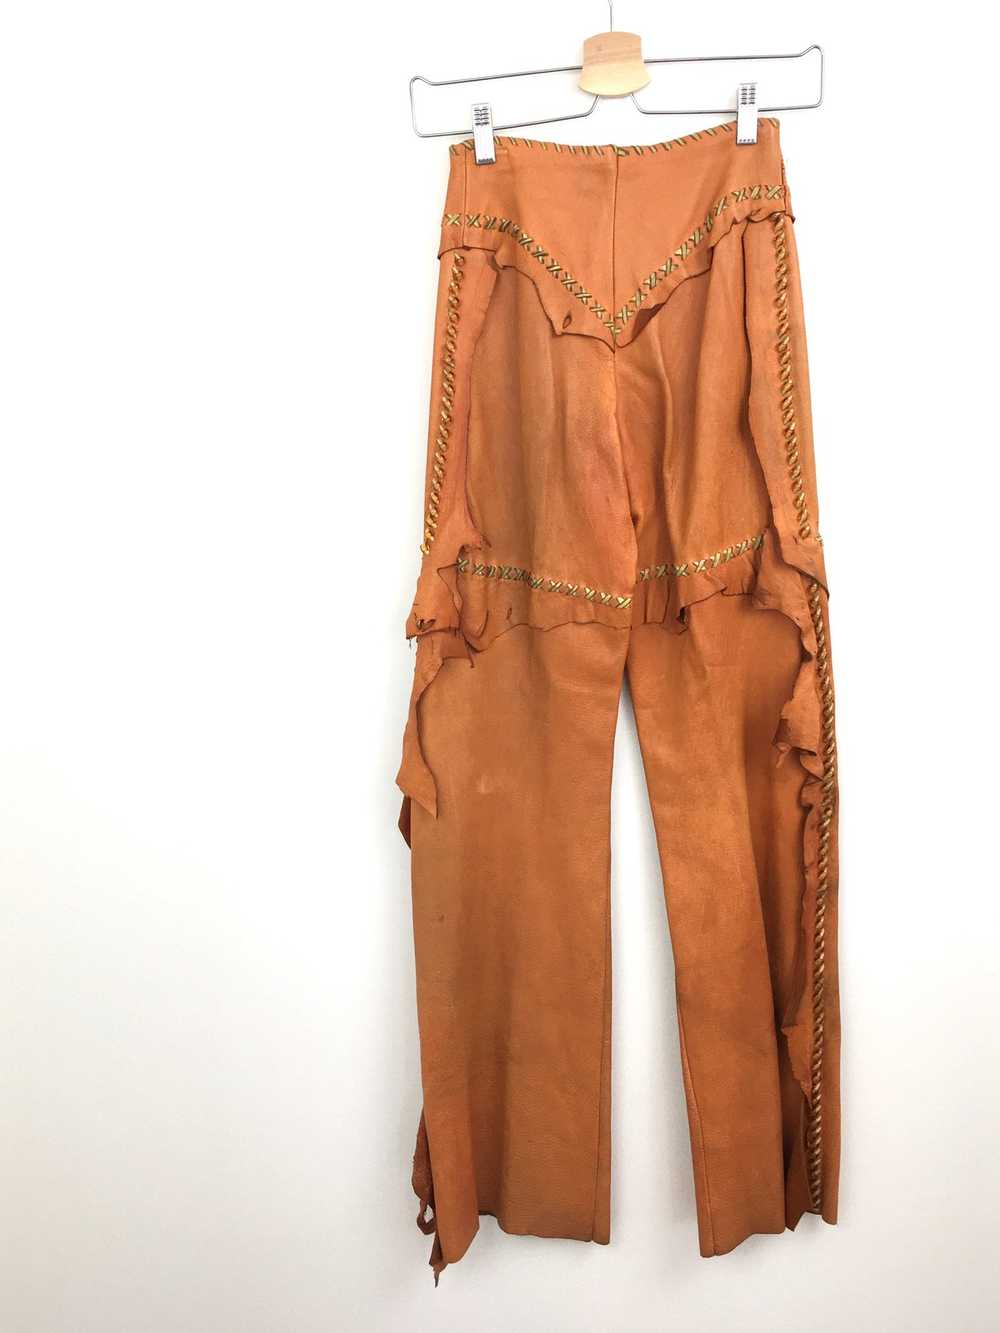 1970s Clifford Olson Artisan Made Leather Pants - image 5